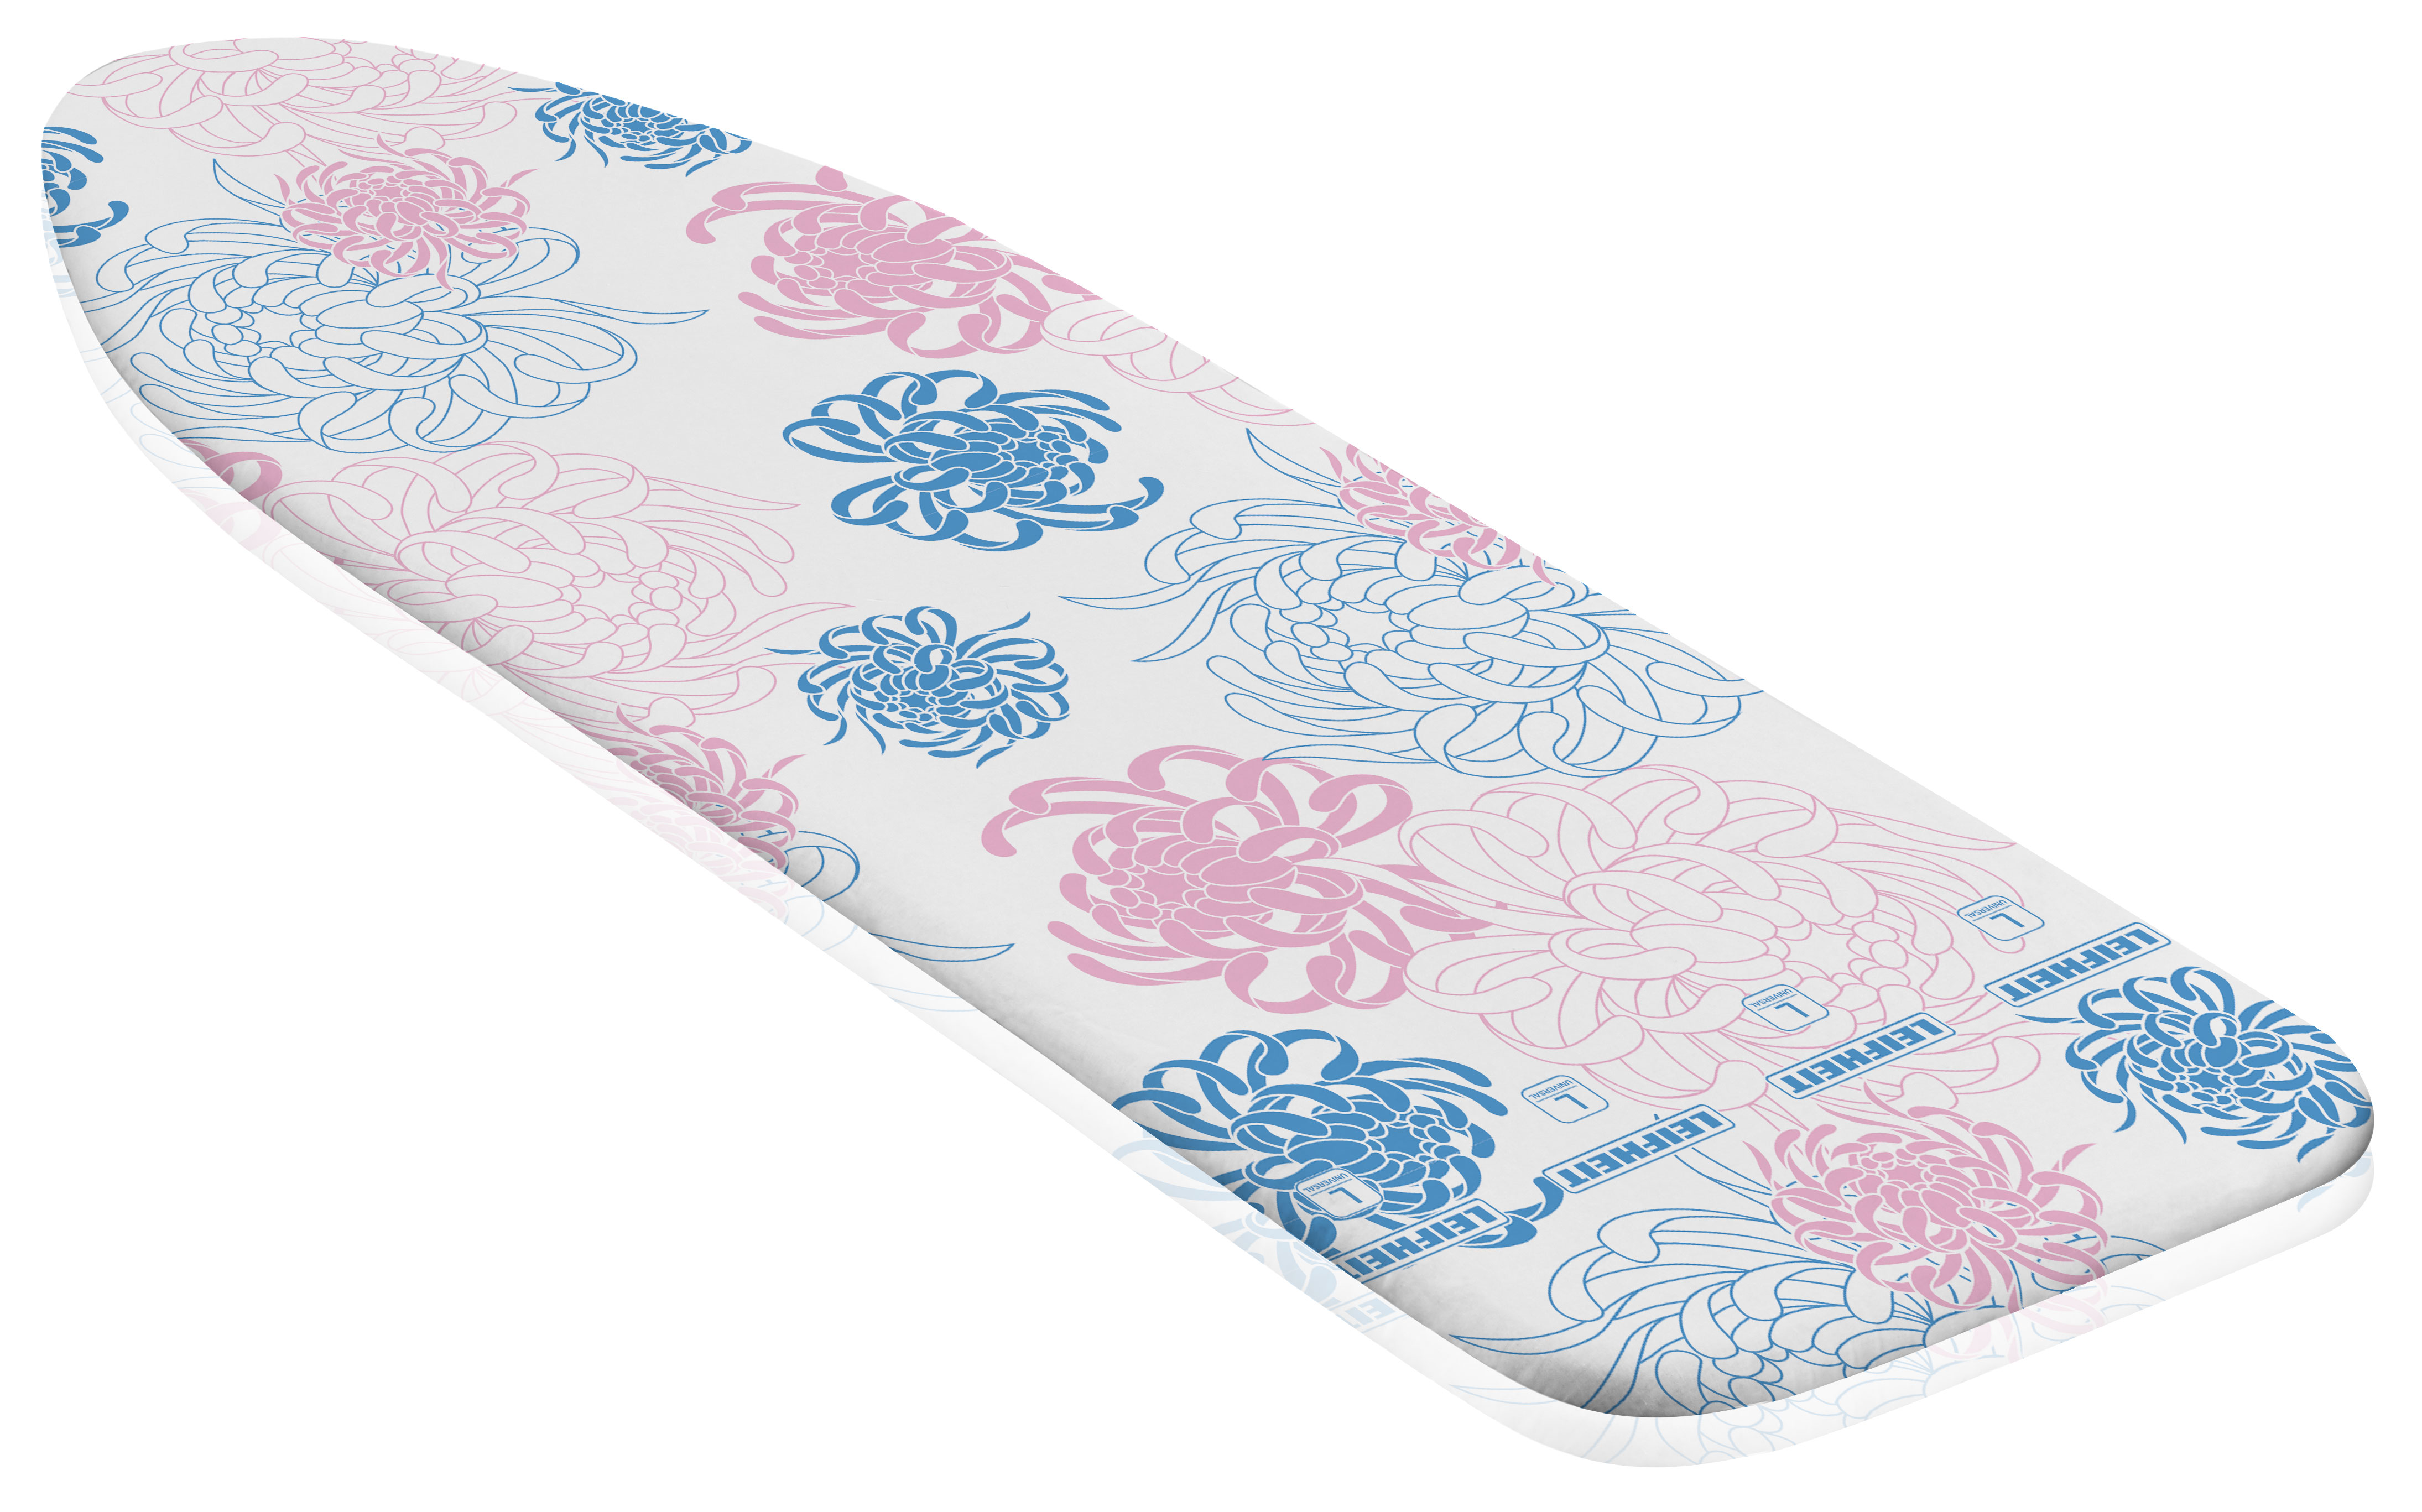 LEIFHEIT IRONING BOARD COVER REPLACEMENT